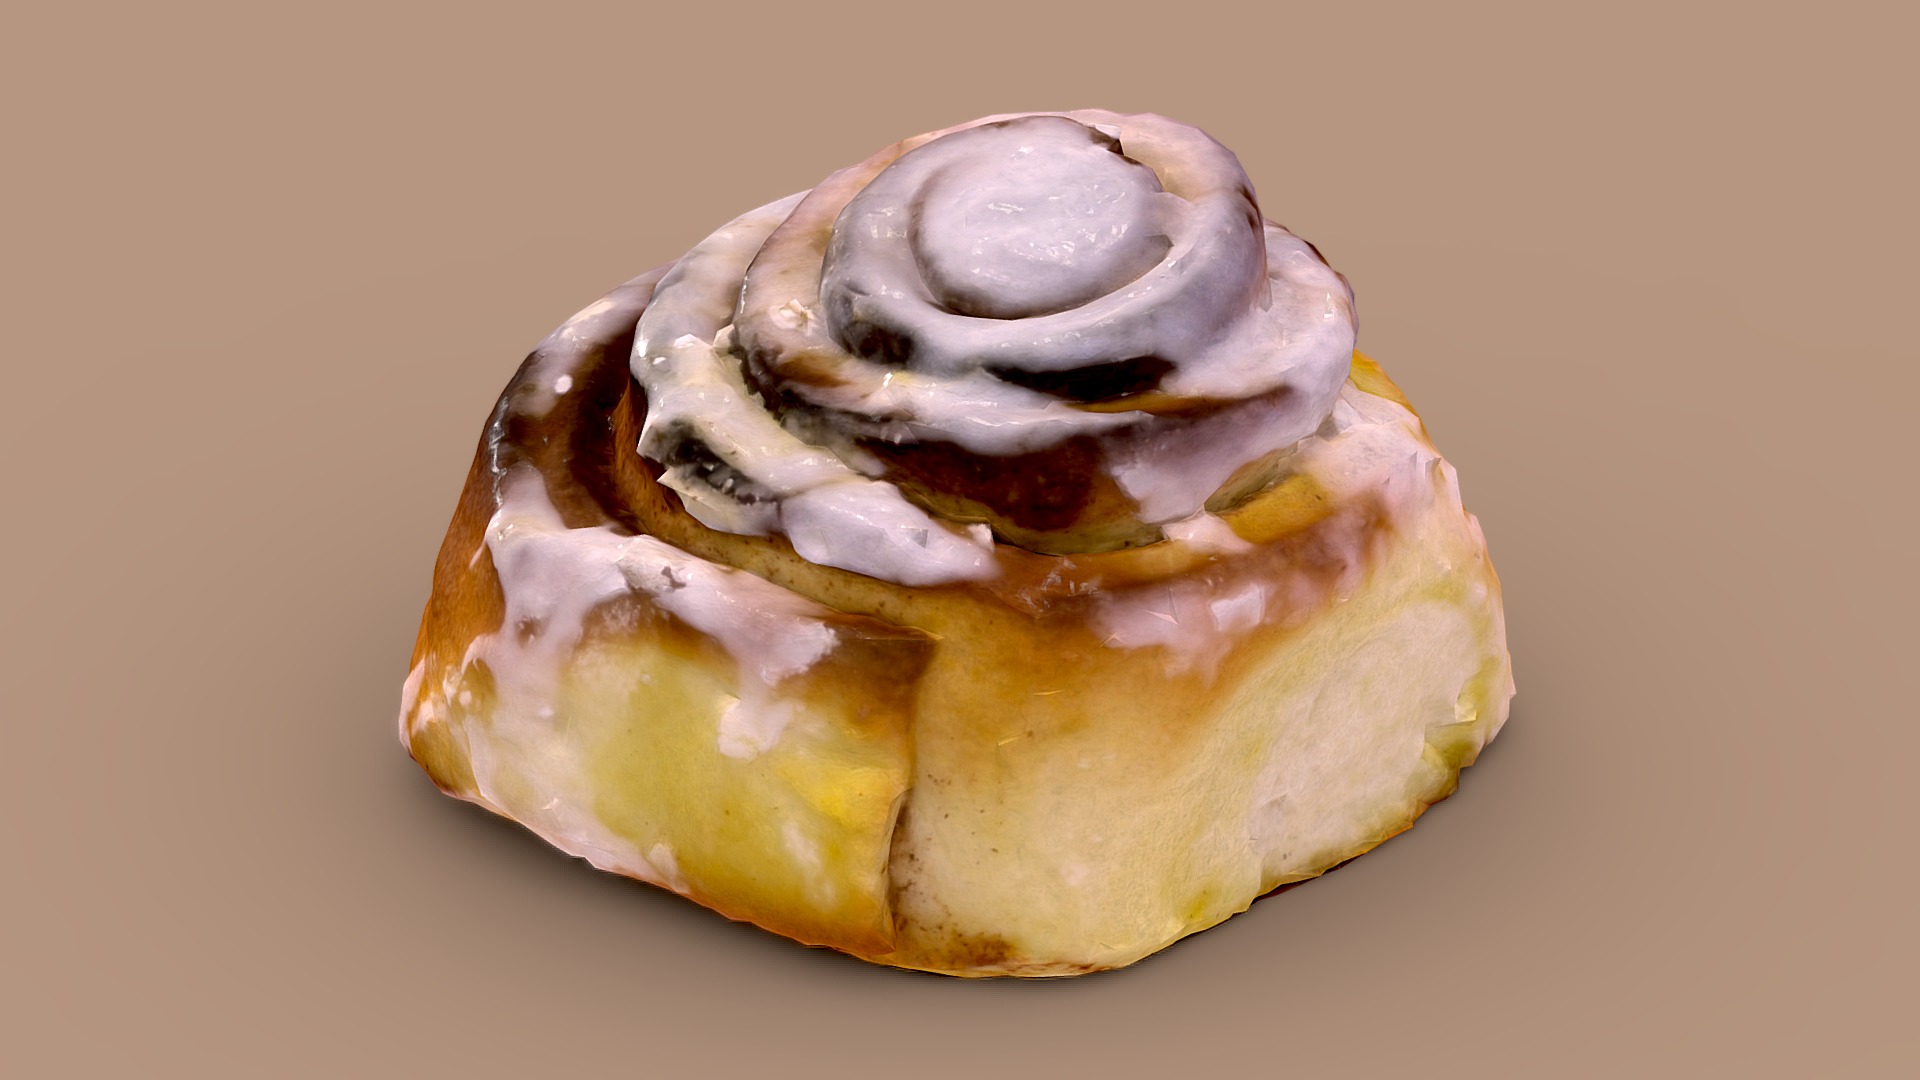 3D model Cinnamon Bun – #BakedGoodsChallenge - This is a 3D model of the Cinnamon Bun - #BakedGoodsChallenge. The 3D model is about a close up of a pastry.